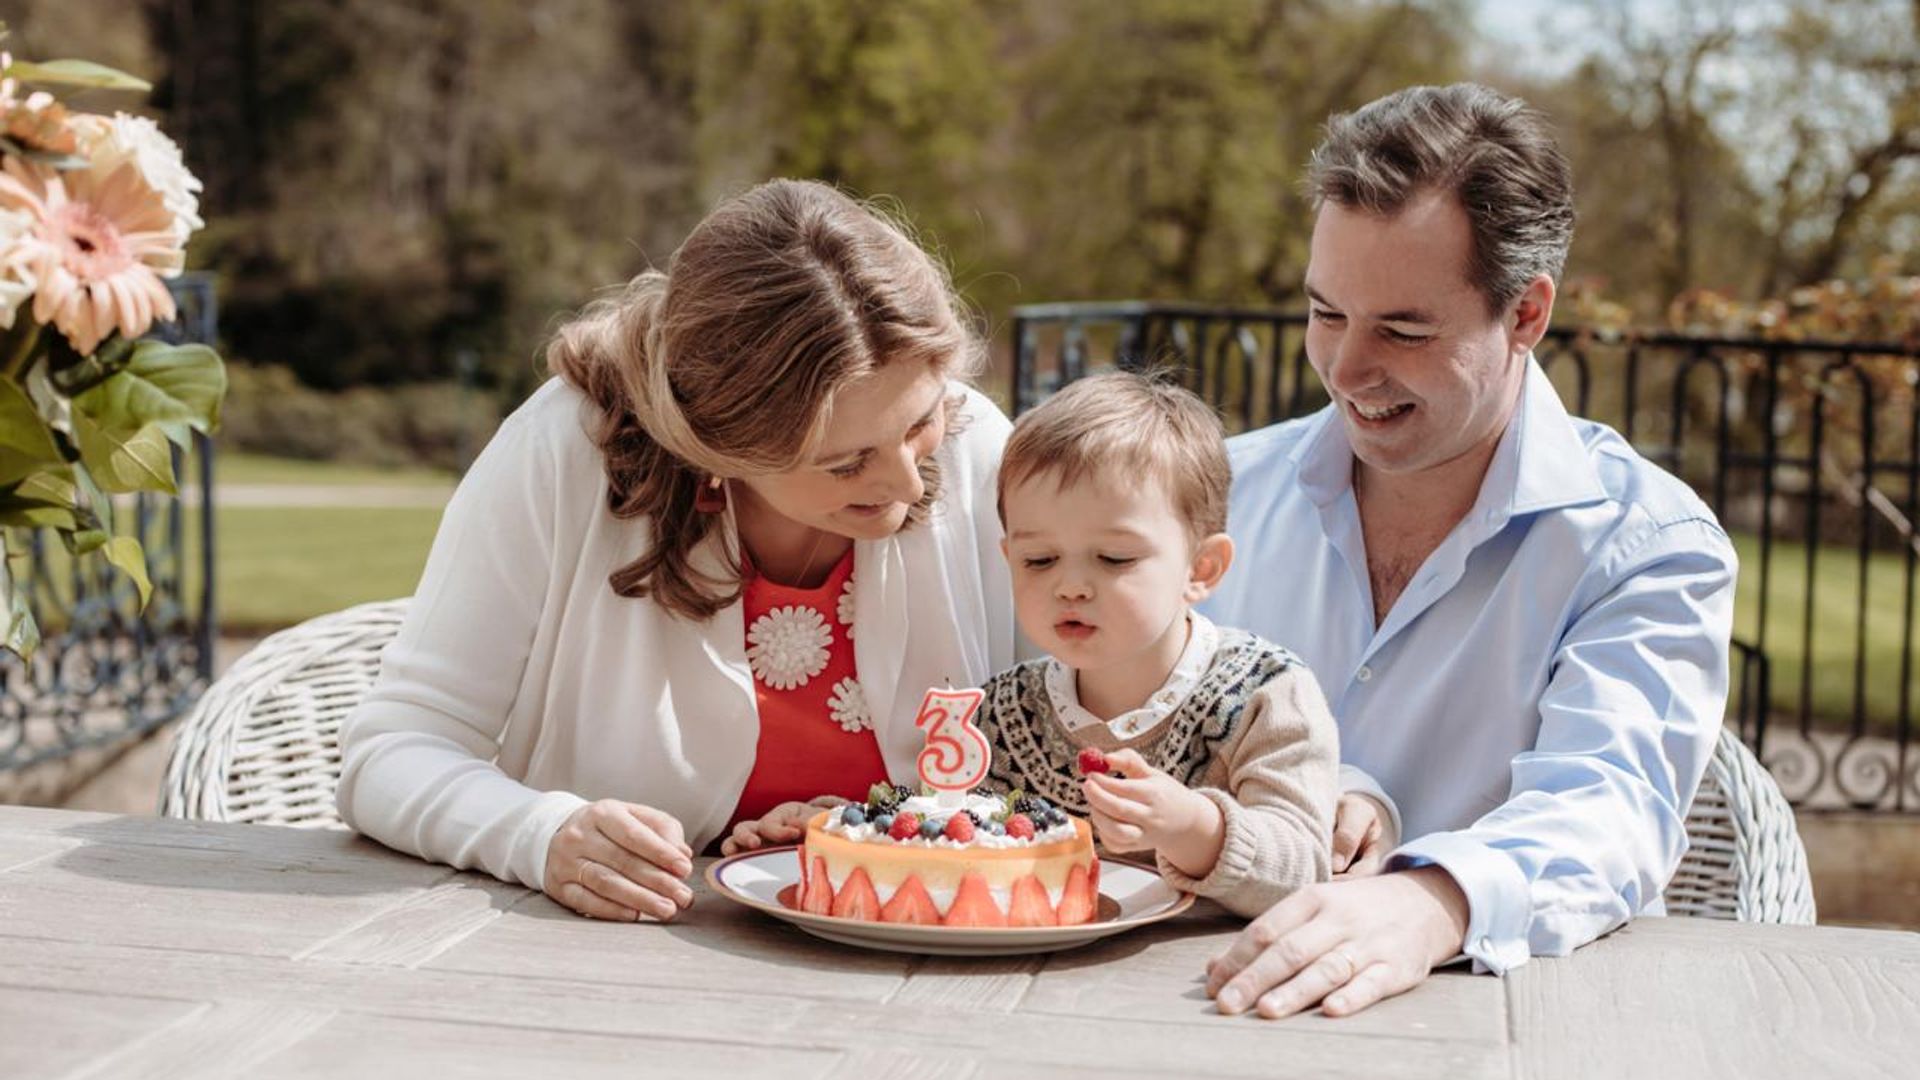 Luxembourg's Princess Stephanie celebrates son's third birthday weeks after welcoming second royal baby